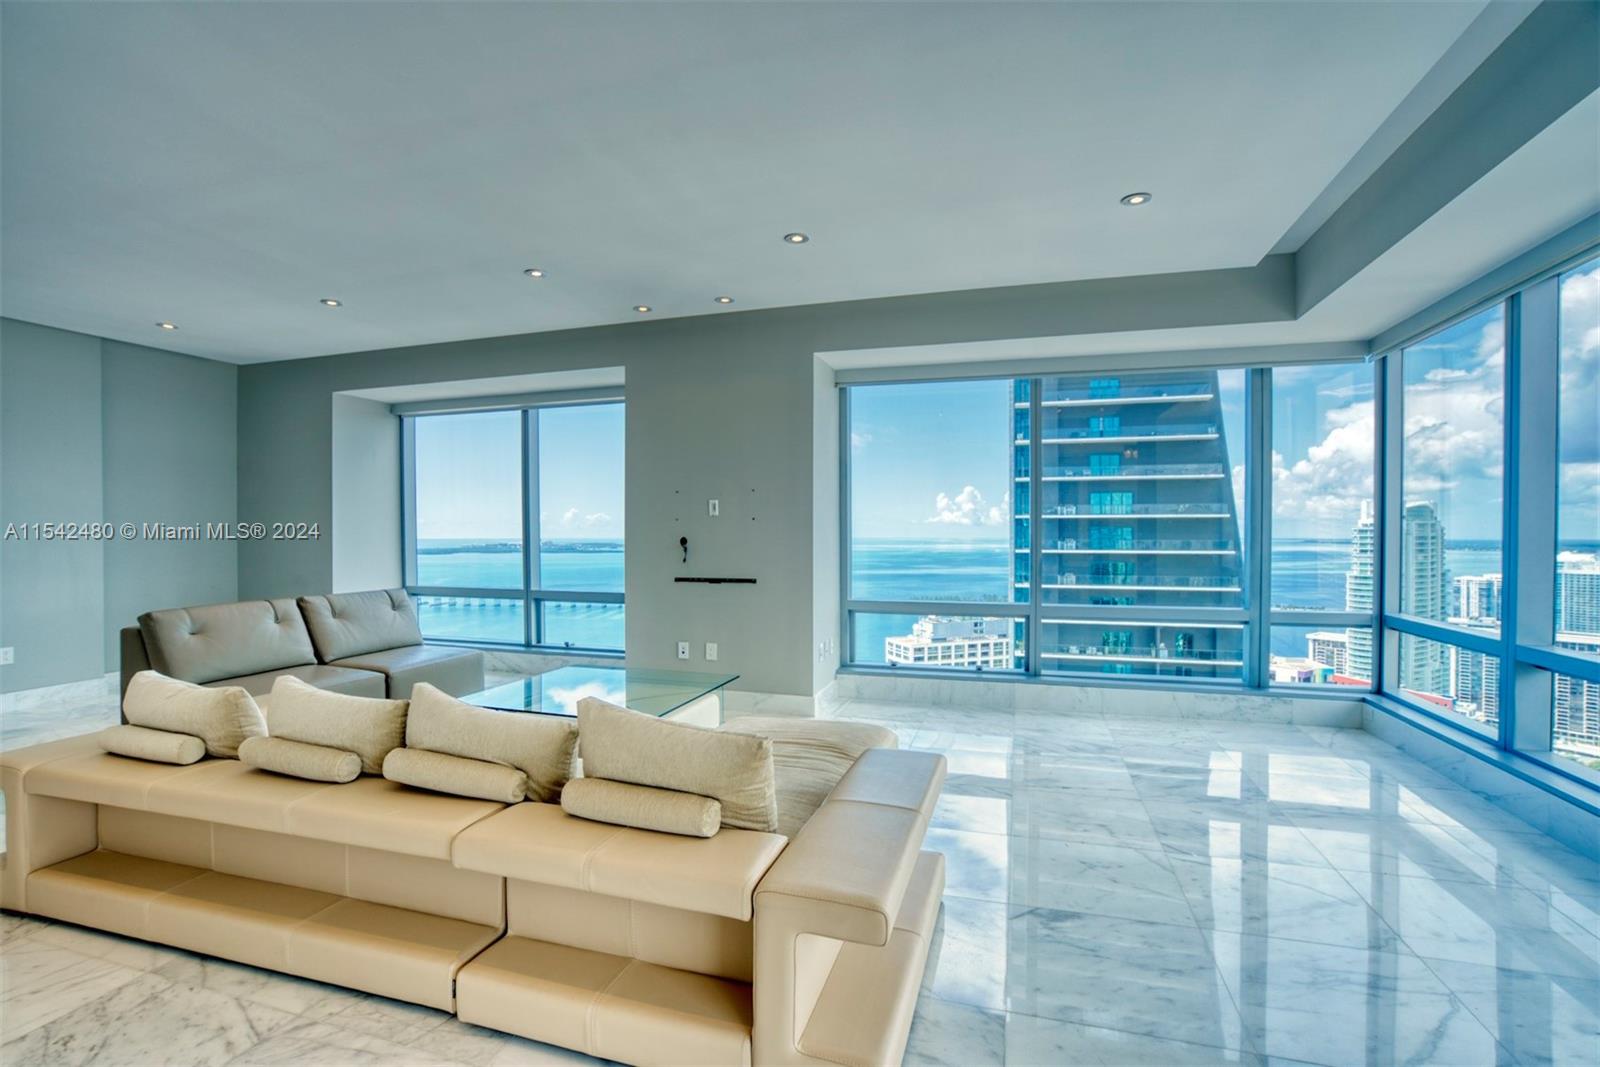 This renovated & upgraded corner residence on the 46th floor offers stunning bay, ocean and city views as far as the eye can see. Top-of-the-line finishes, Carrara marble and wood floors, an amazing open kitchen with quartz countertops and top-of-the-line appliances, electric blinds, custom-built closets, a storage unit and more! Luxurious retreat offered by the building and its staff including 3 pools with cabanas, room service, restaurant, 50,000 sq.ft. of gym and spa, owner’s lounge, 24-hour concierge, valet parking and security.